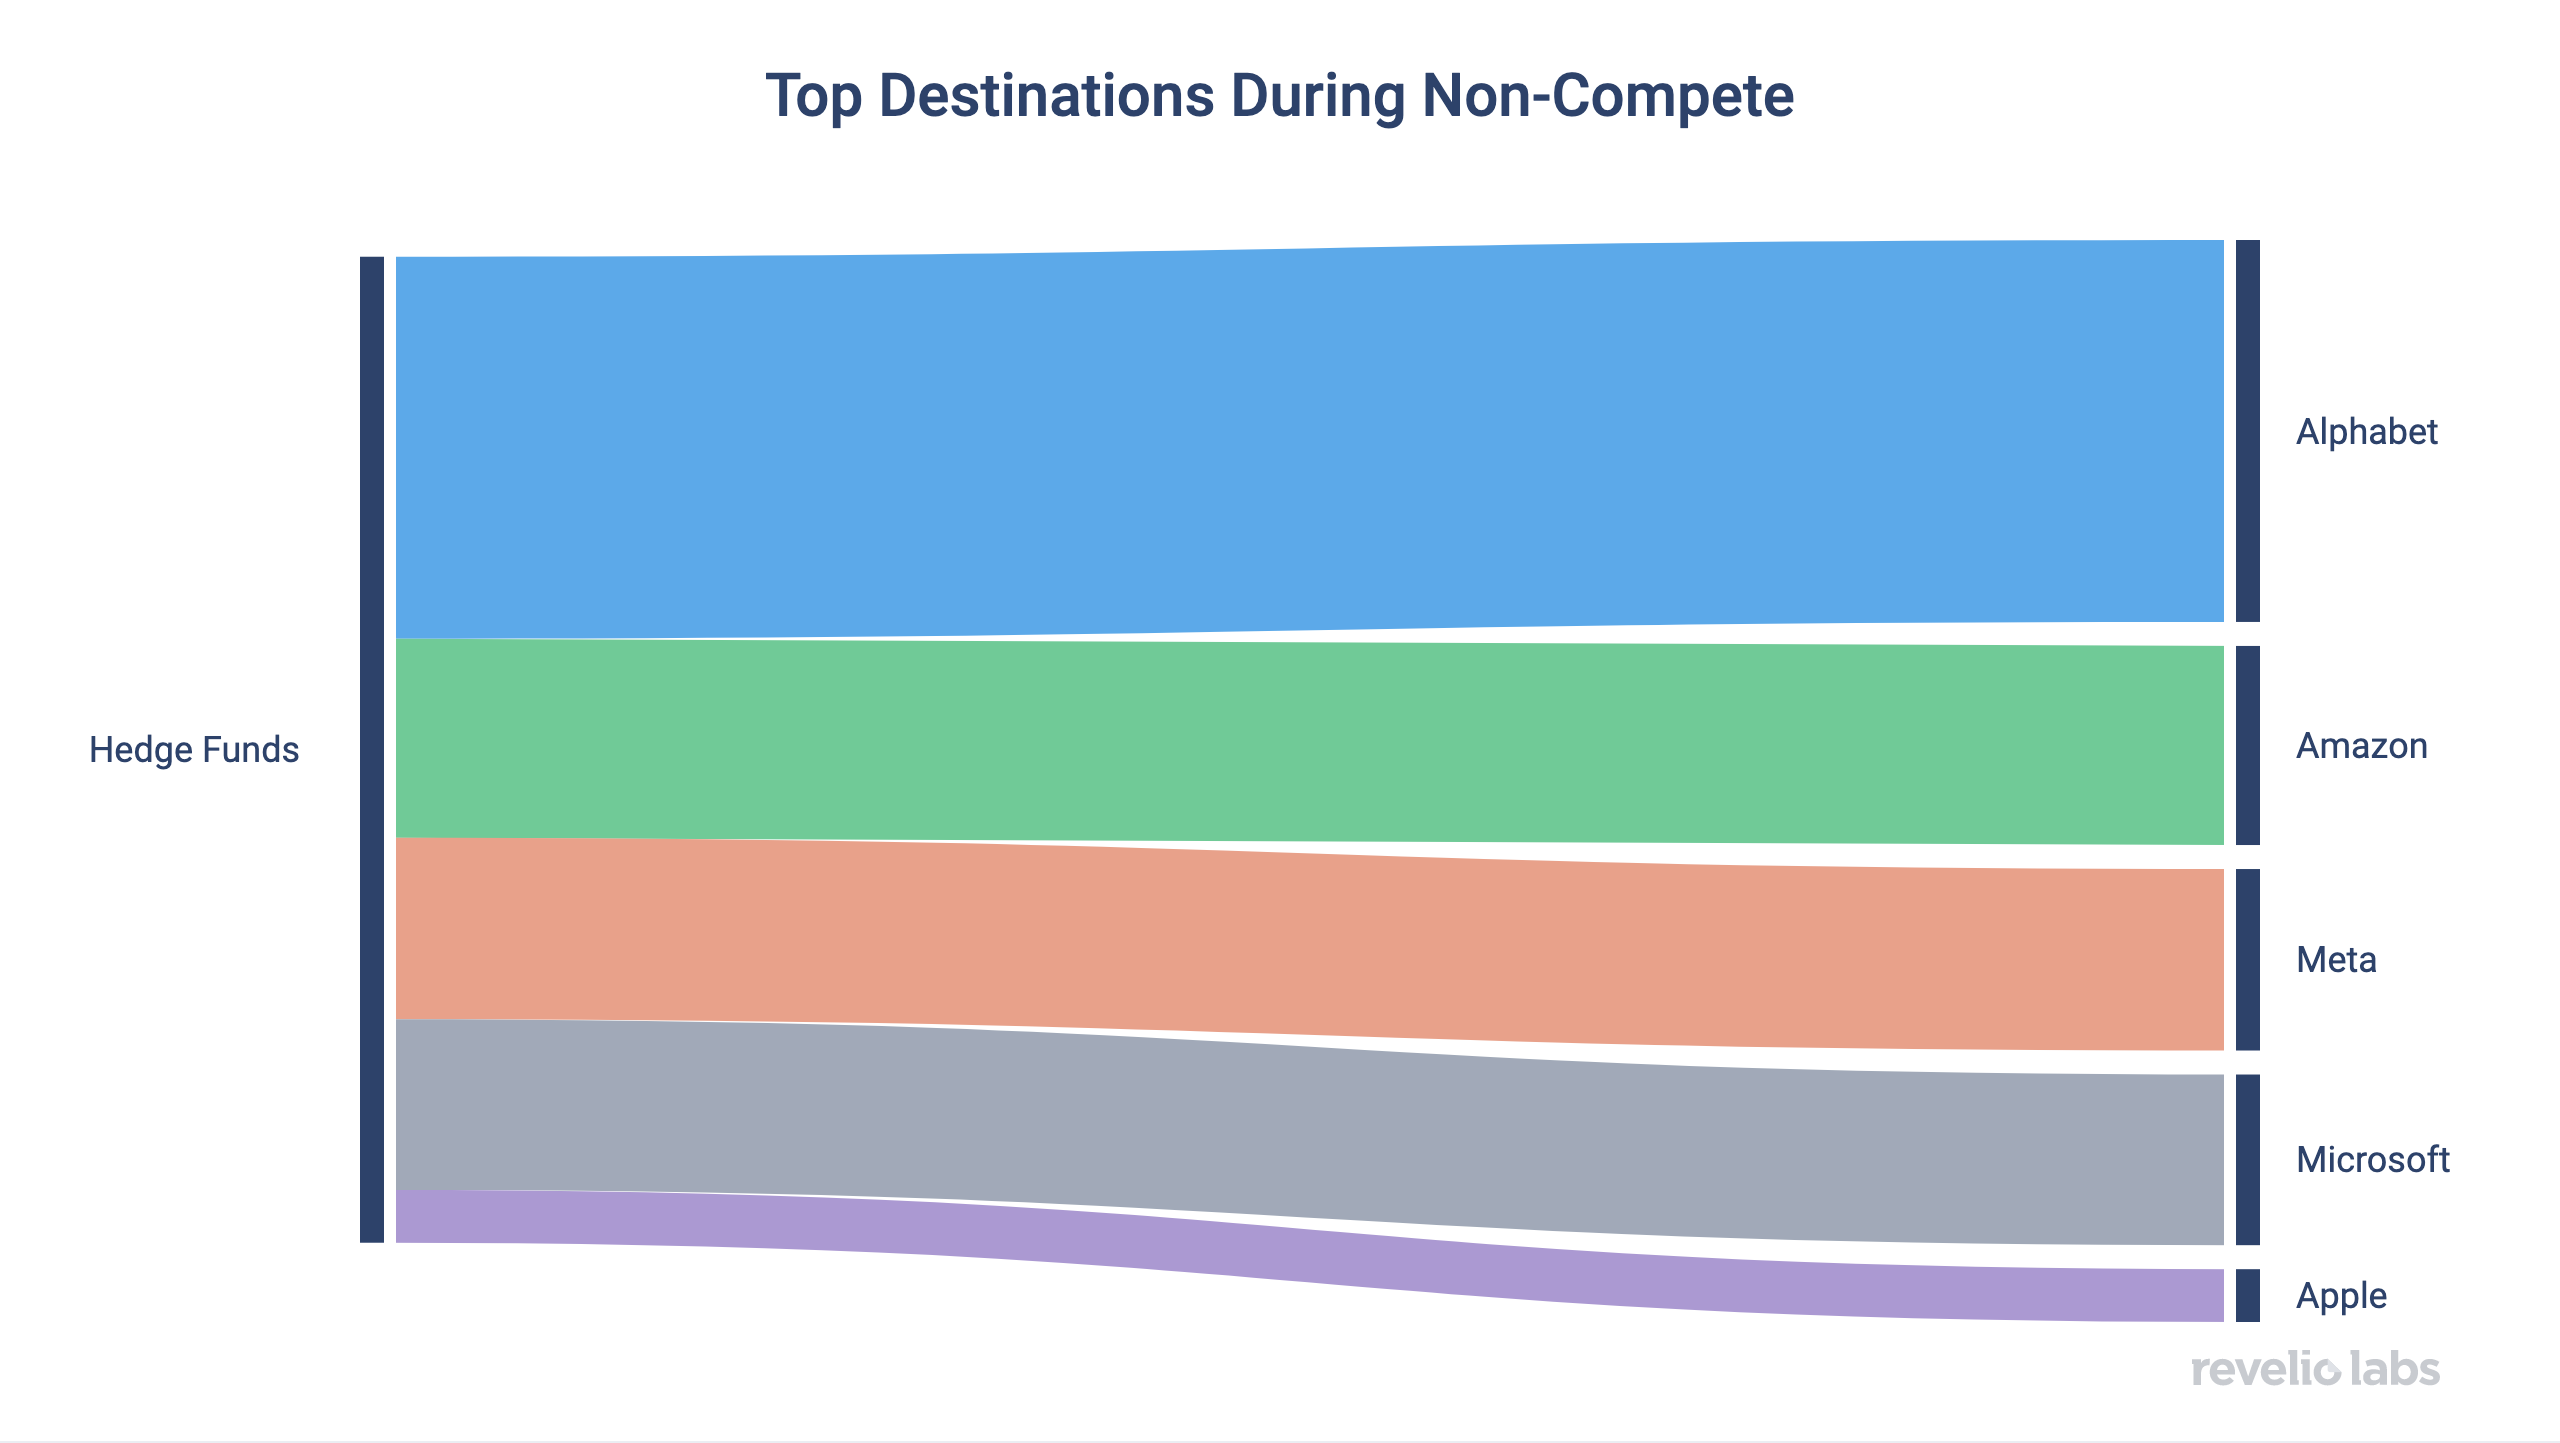 Top Destinations During Non-Competes